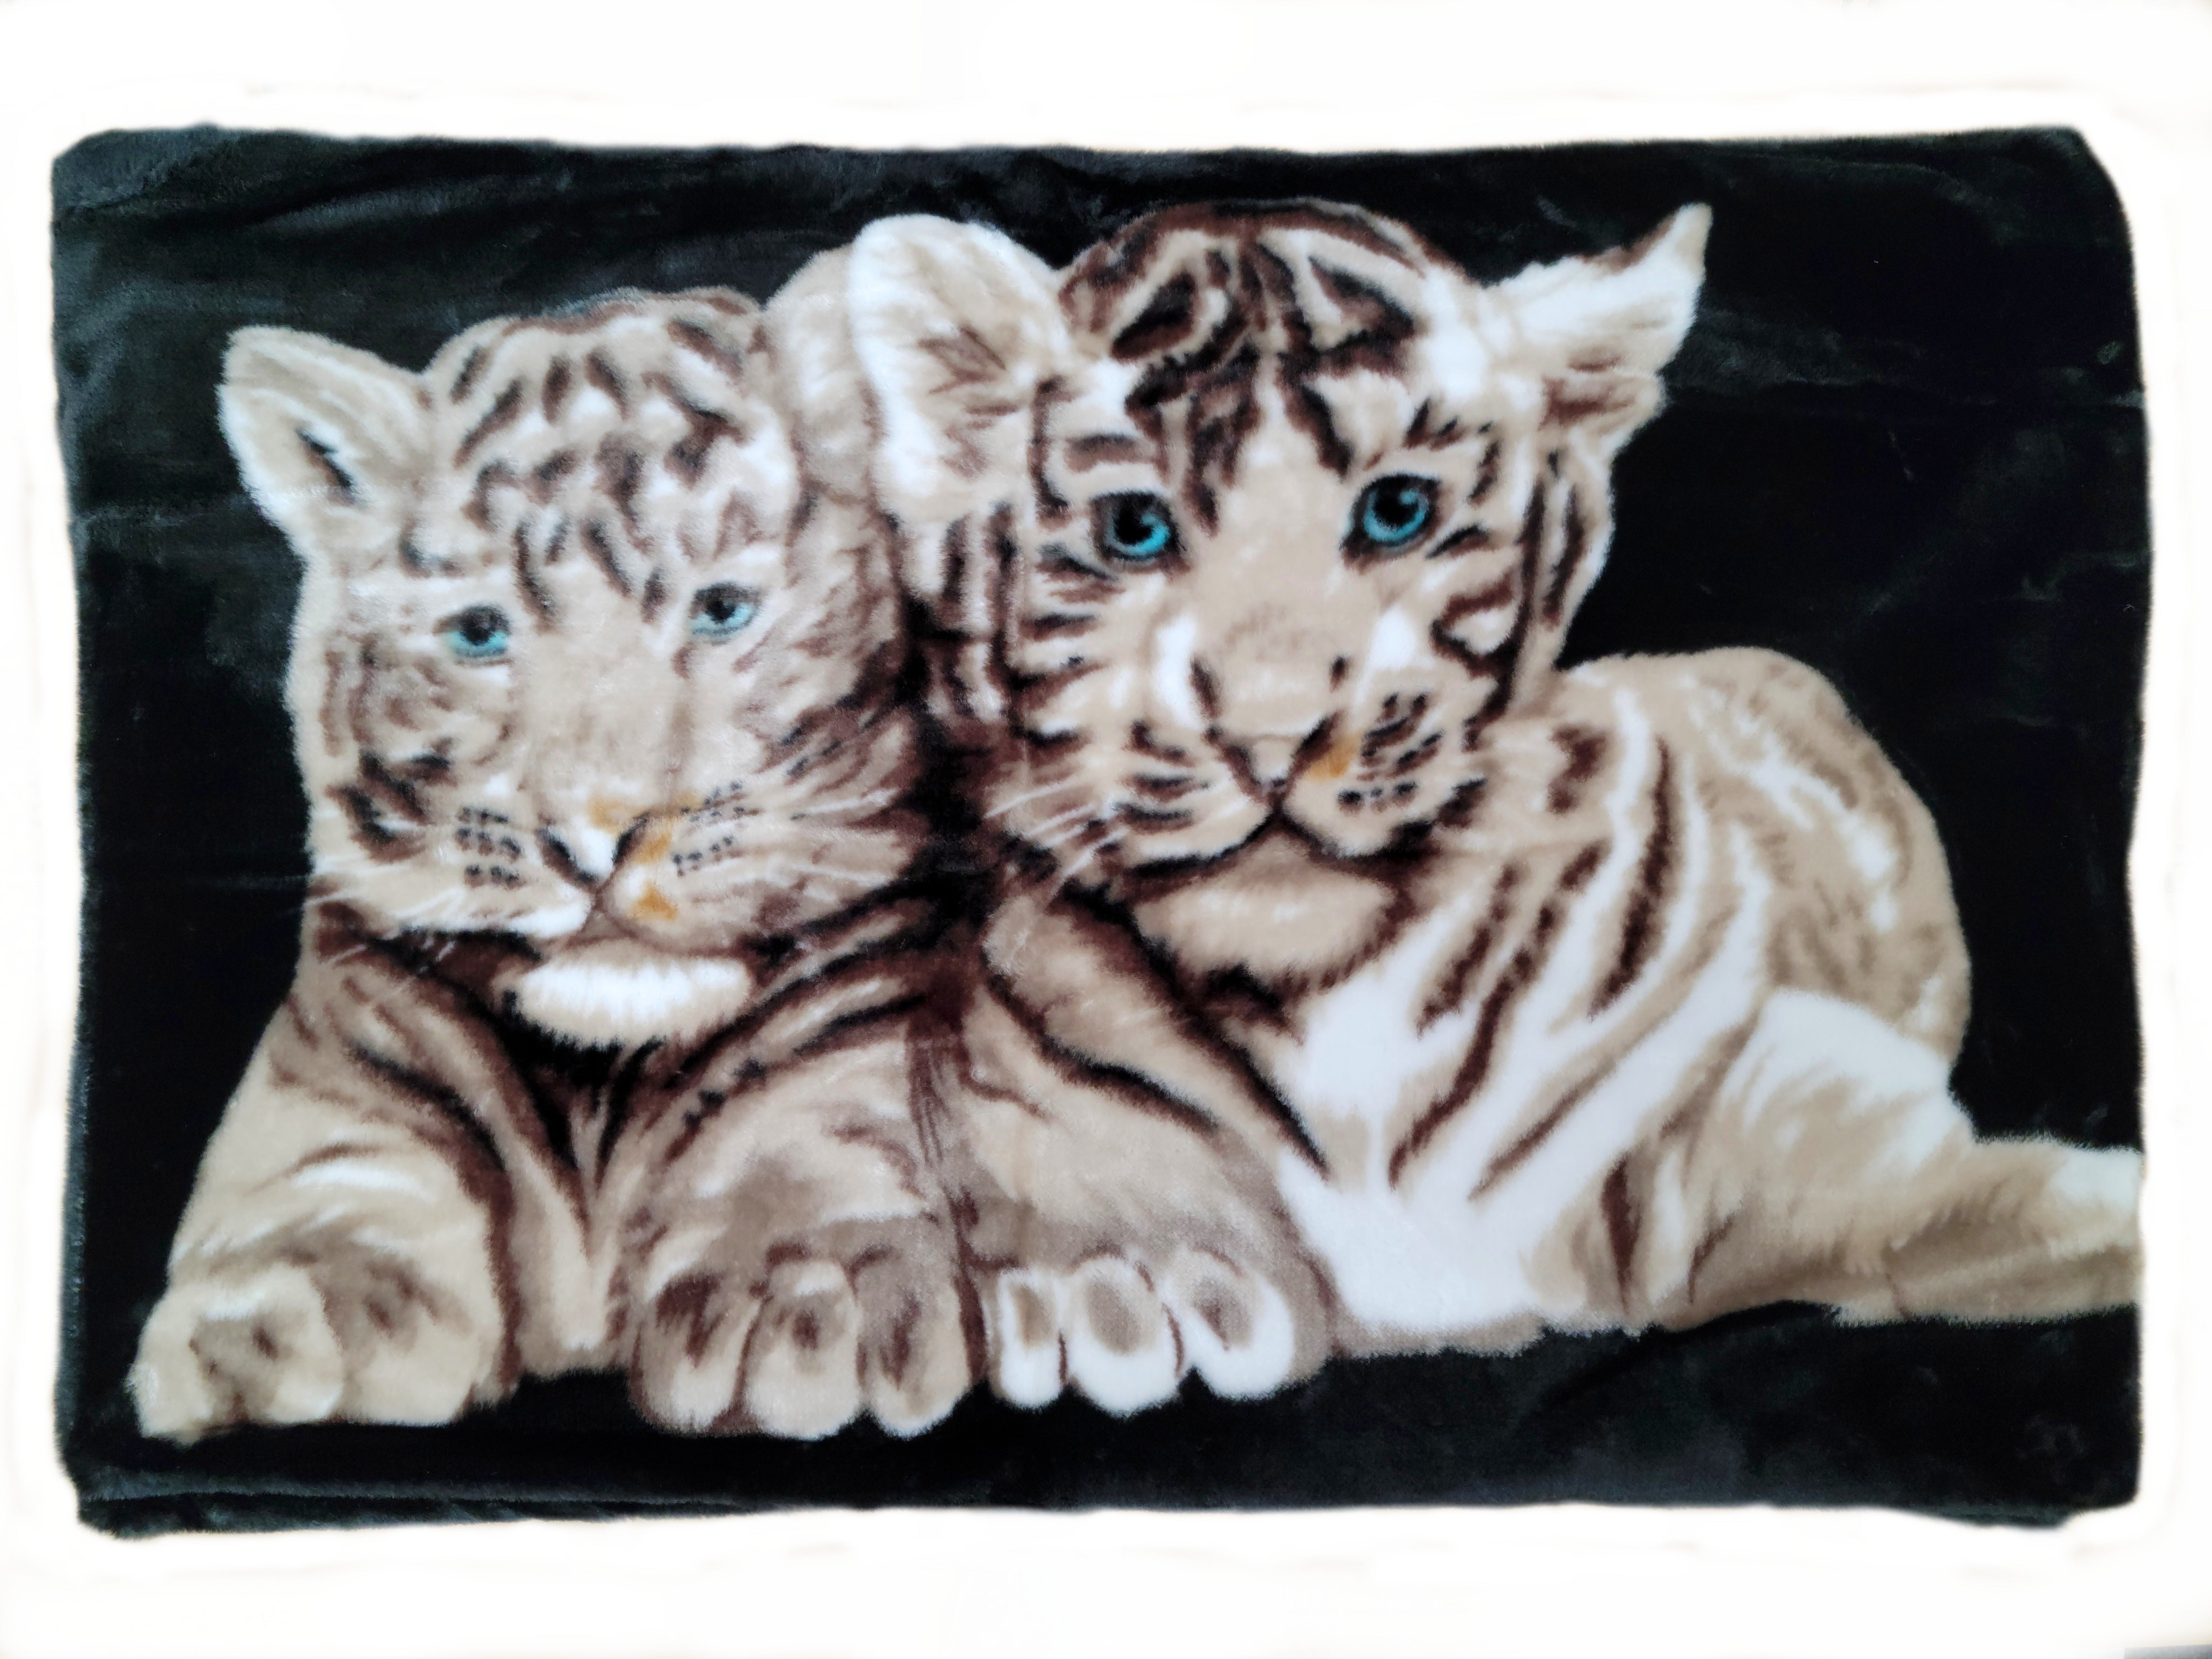 Osaka 3pc White Tigers Fleece Borrego Blanket Double Ply Blanket - Super Soft Warm - Thick and Heavy Plush Blanket - With 2 Pillow Sham